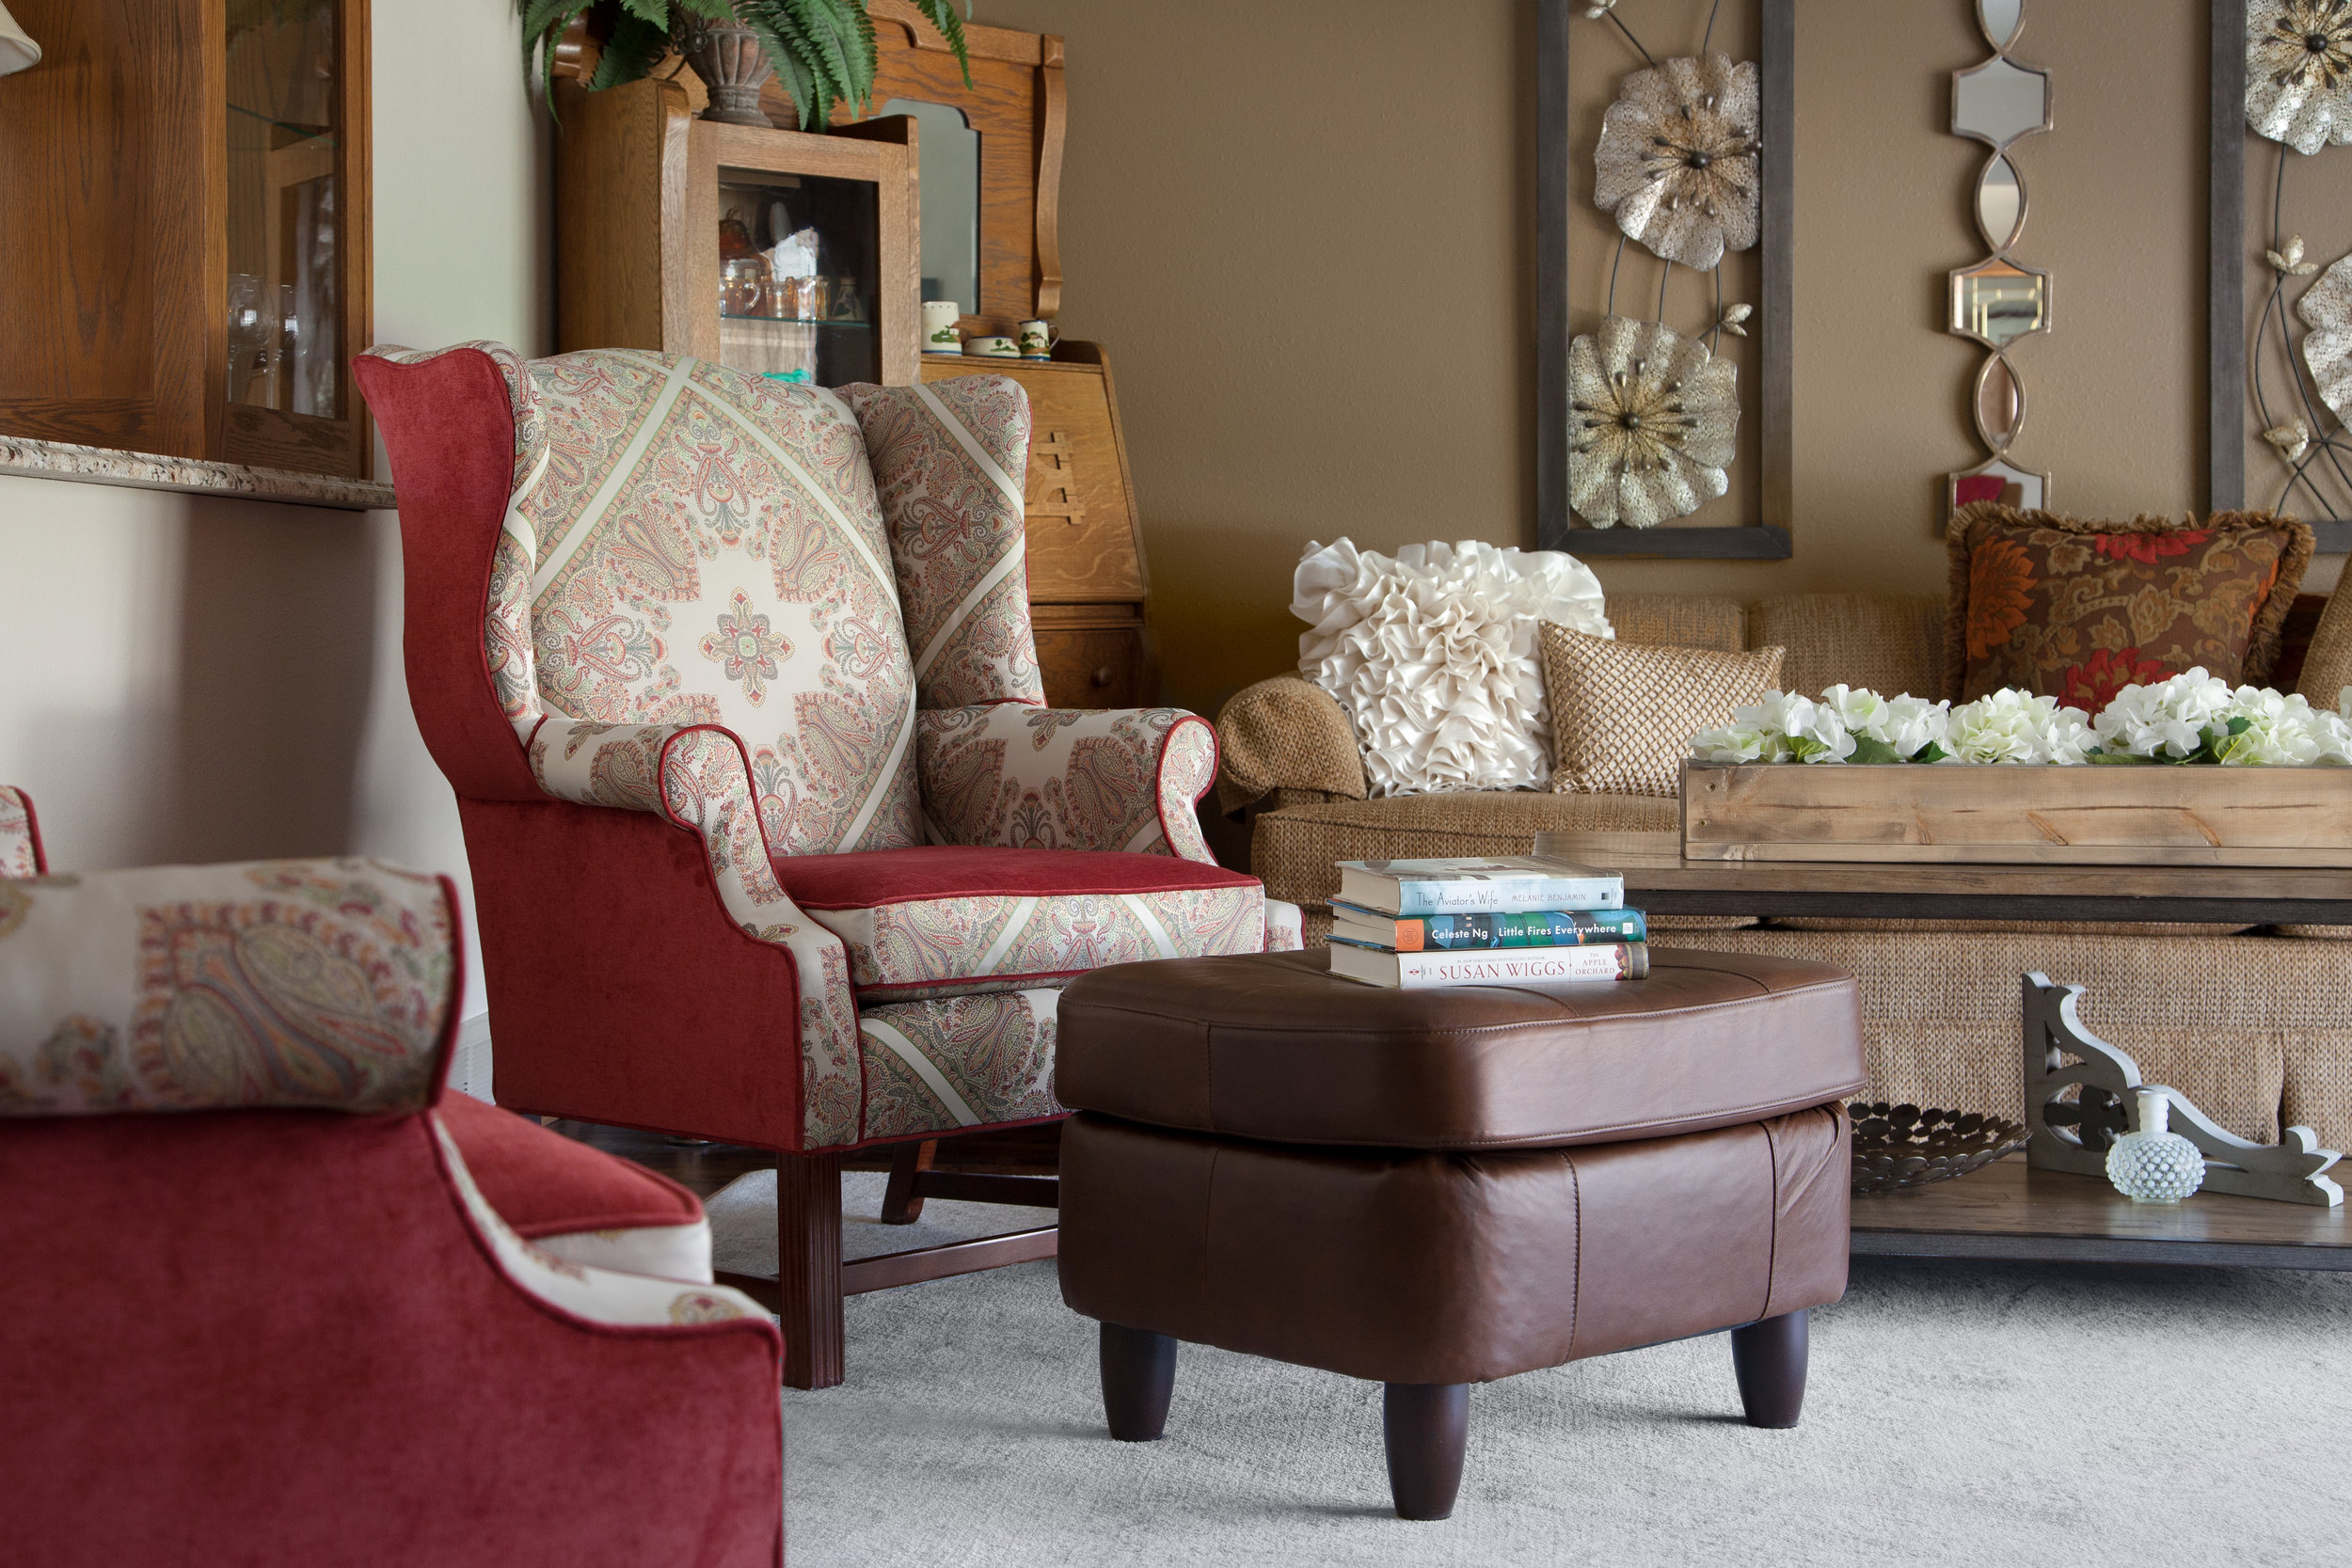 Recover Existing Furniture Vs Purchasing New Furniture